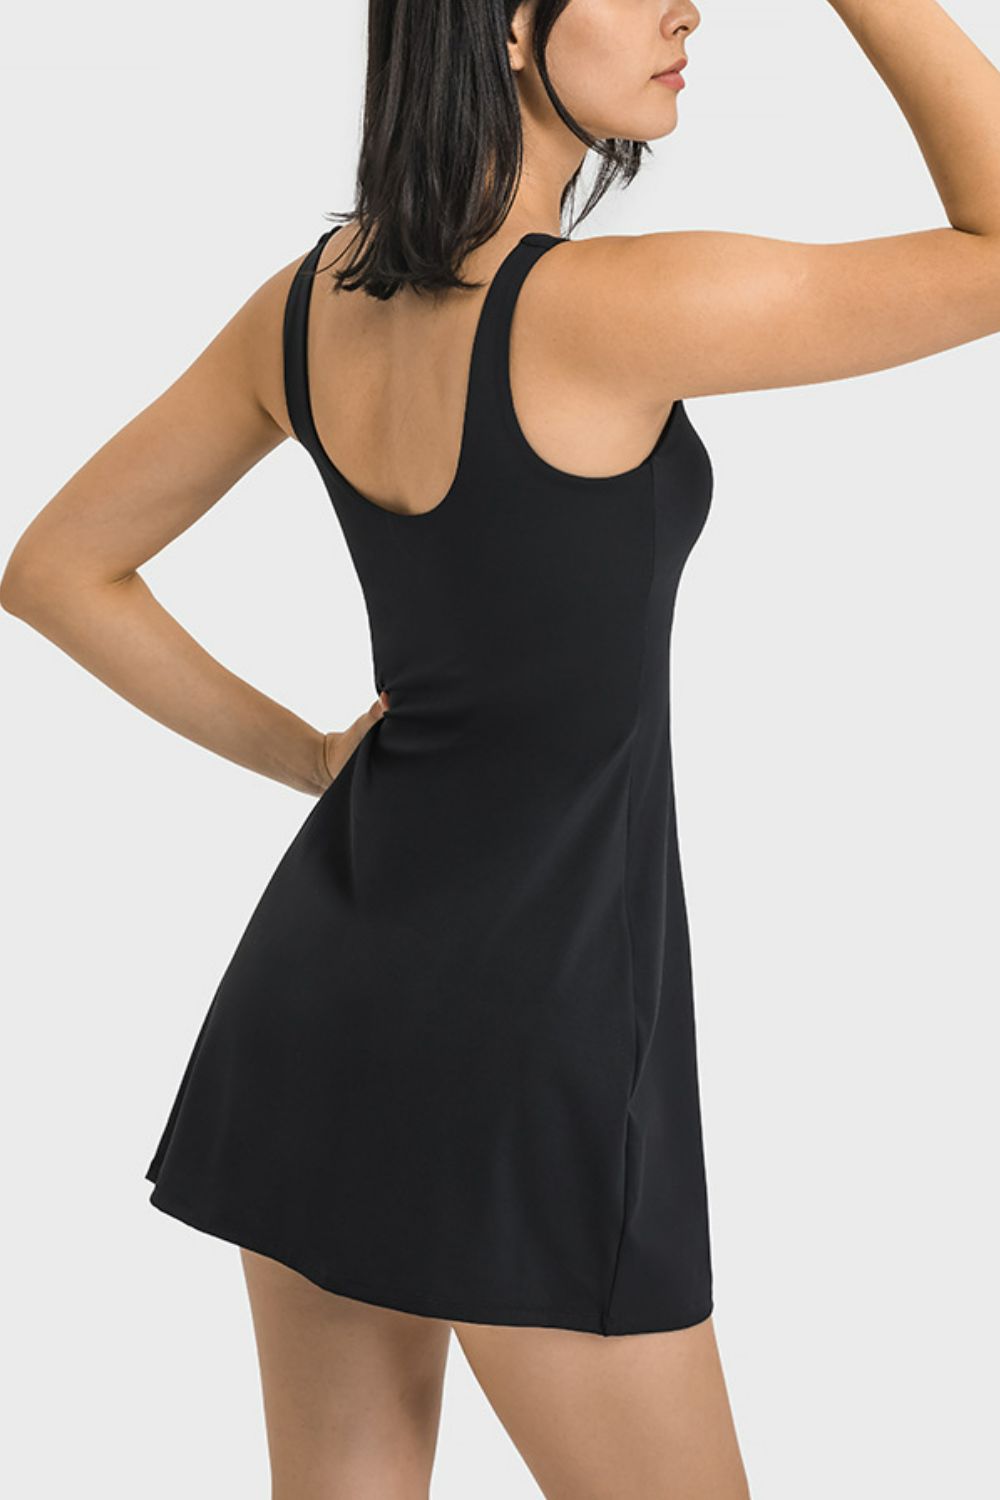 Full Coverage Shortie Bottom One-piece Athletic Tennis Dress